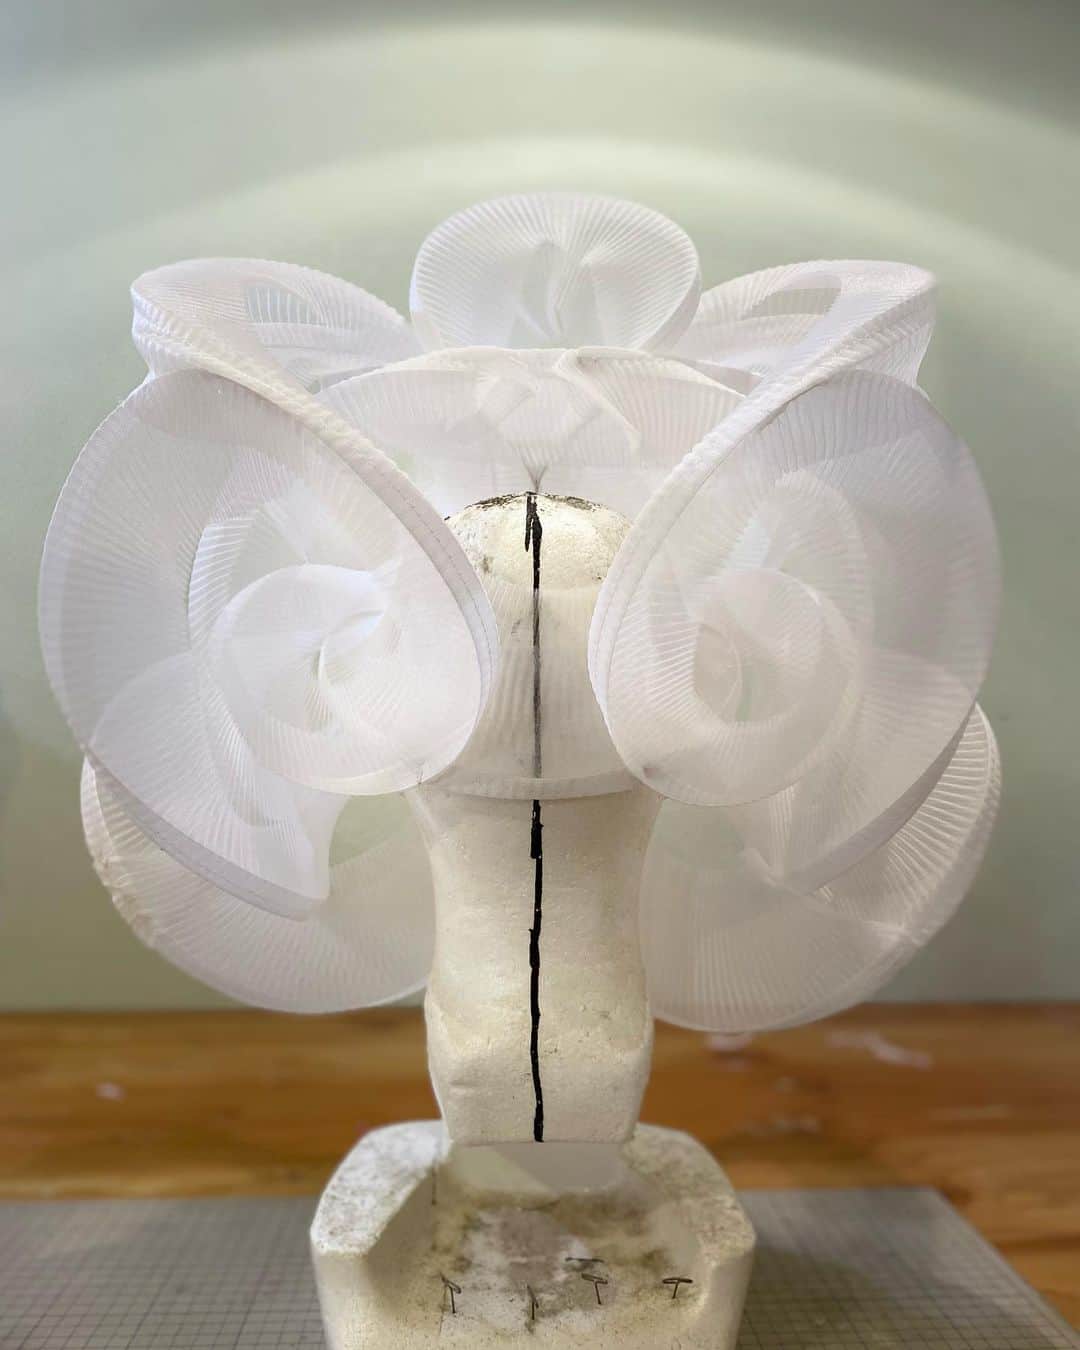 ARAKI SHIROのインスタグラム：「-headpiece making/white ver.-  The custom-made headpiece would be all constructed with the spiral pleated parts. I am really interested in the process of controlling spiral details into organic shapes.  #ARAKISHIRO  #emergingdesigner #upnextdesigner #fashionforbankrobbers #emergingfashion #conceptualfashion  #upcomingdesigner #fabricmanipulation #sculptural #headpieces」